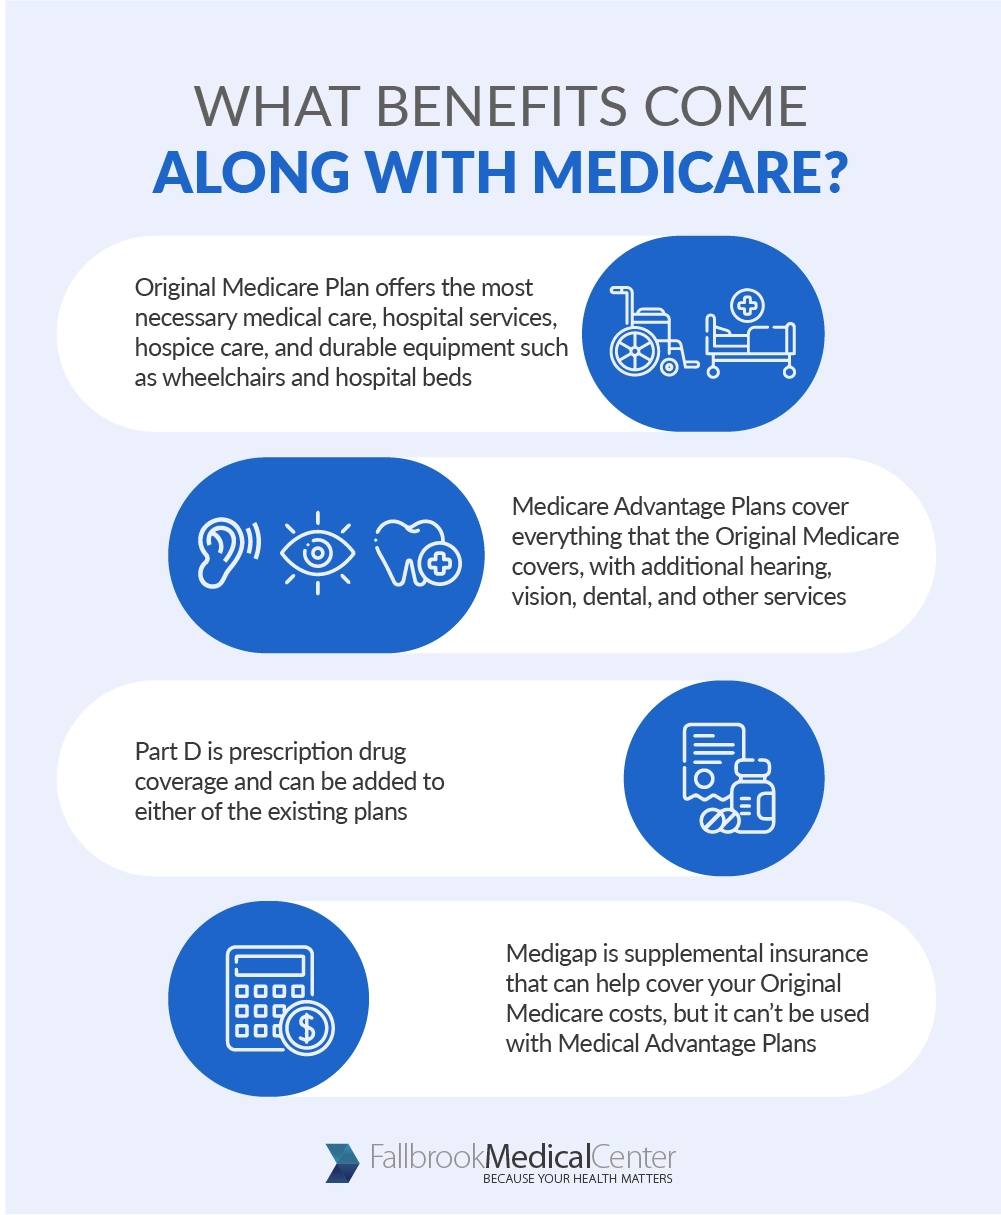 What Benefits Come Along With Medicare?